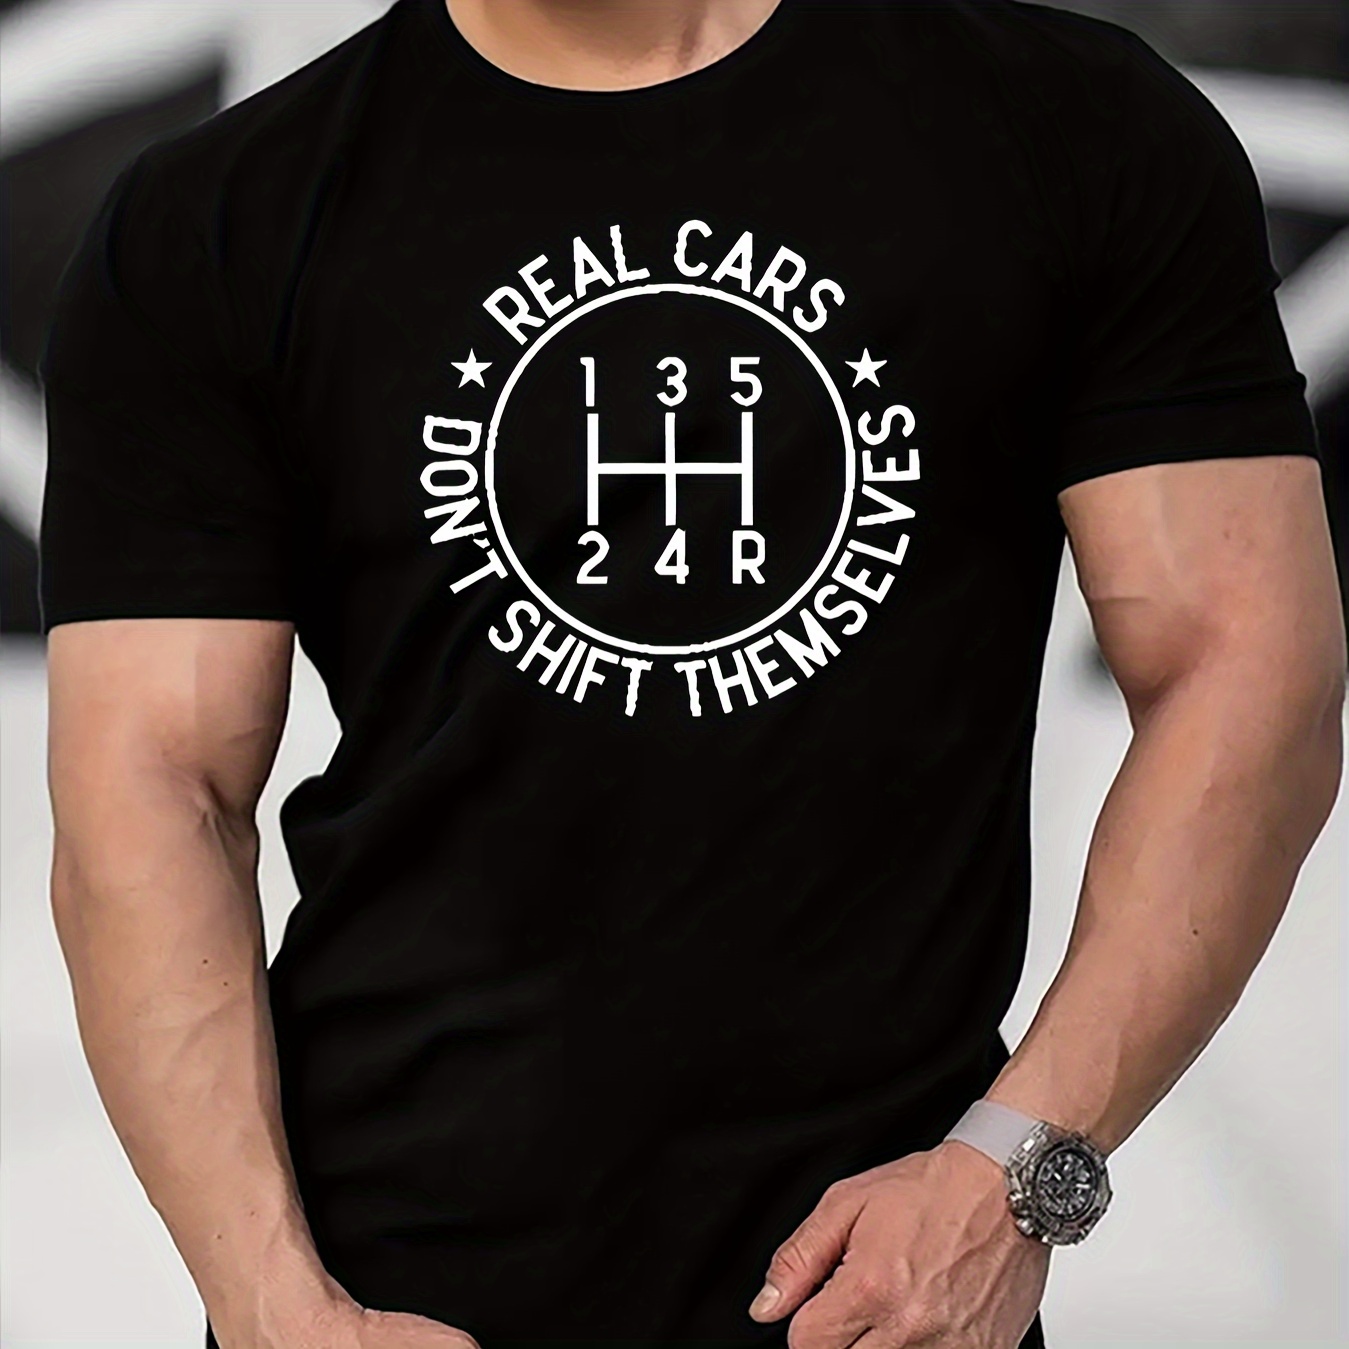 

Real Cars Don't Shift Themselves Letters Print Casual Crew Neck Short Sleeves For Men, Quick-drying Comfy Casual Summer T-shirt For Daily Wear Work Out And Vacation Resorts